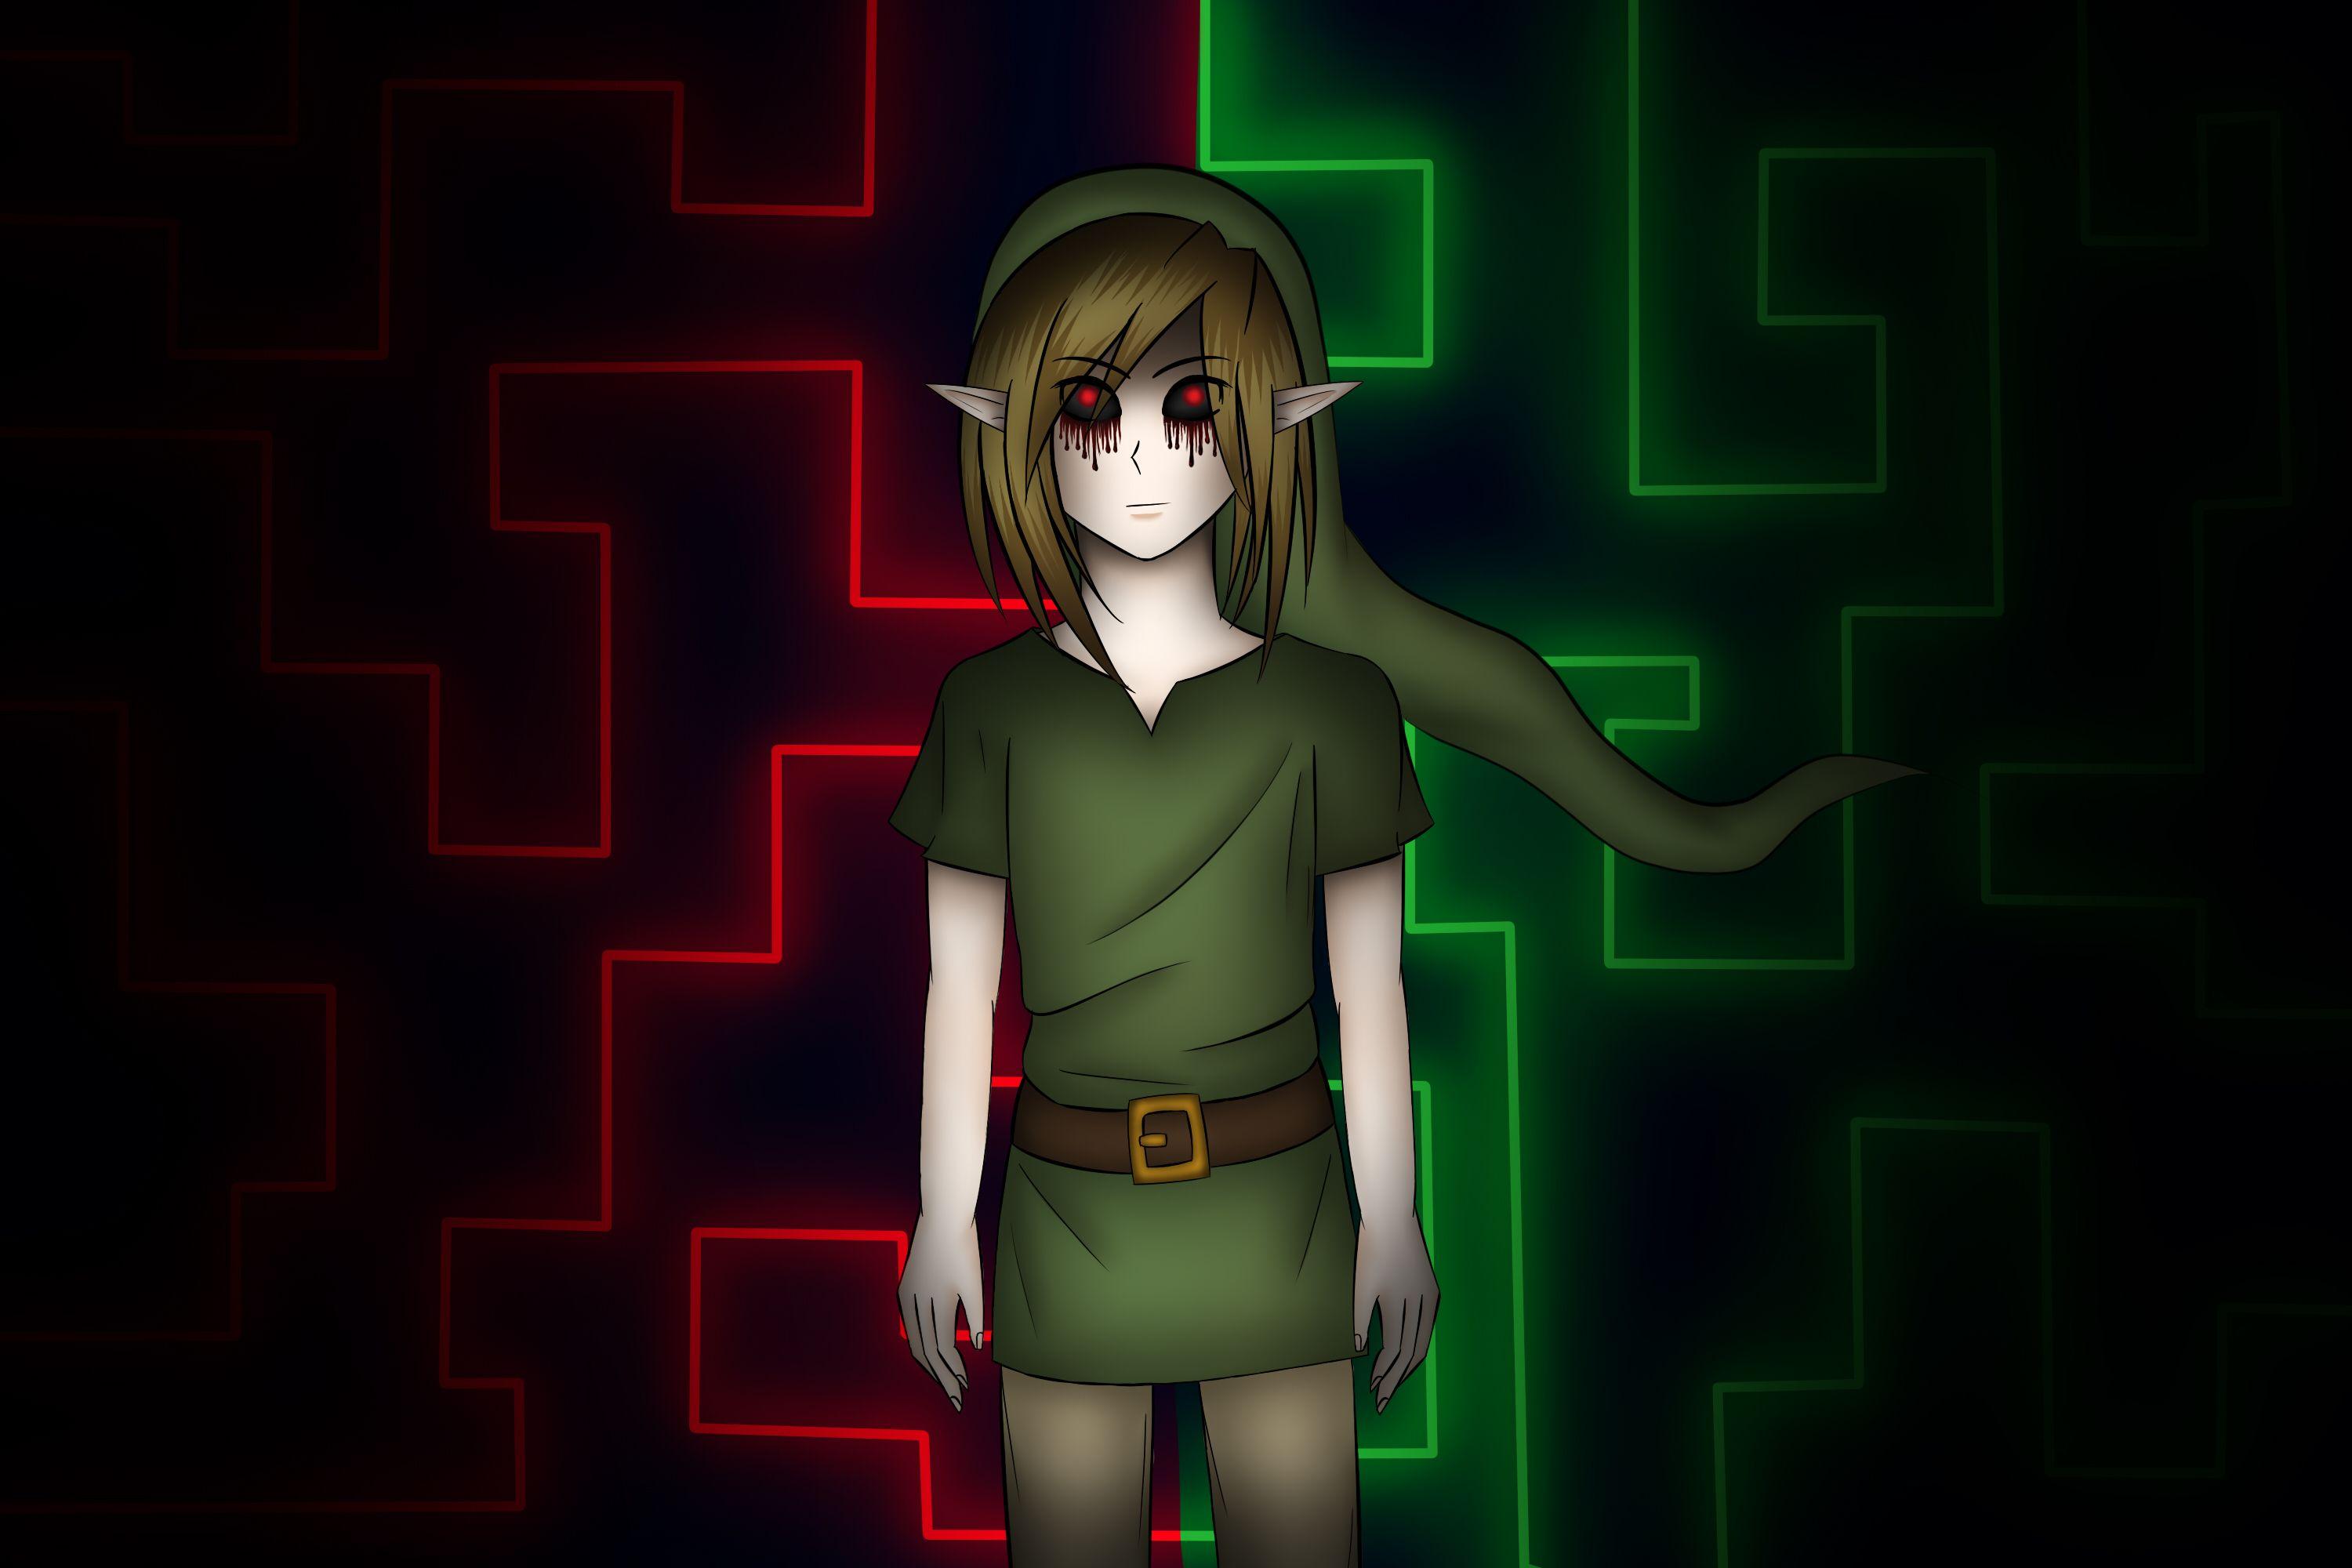 Ben drowned by Makitty.